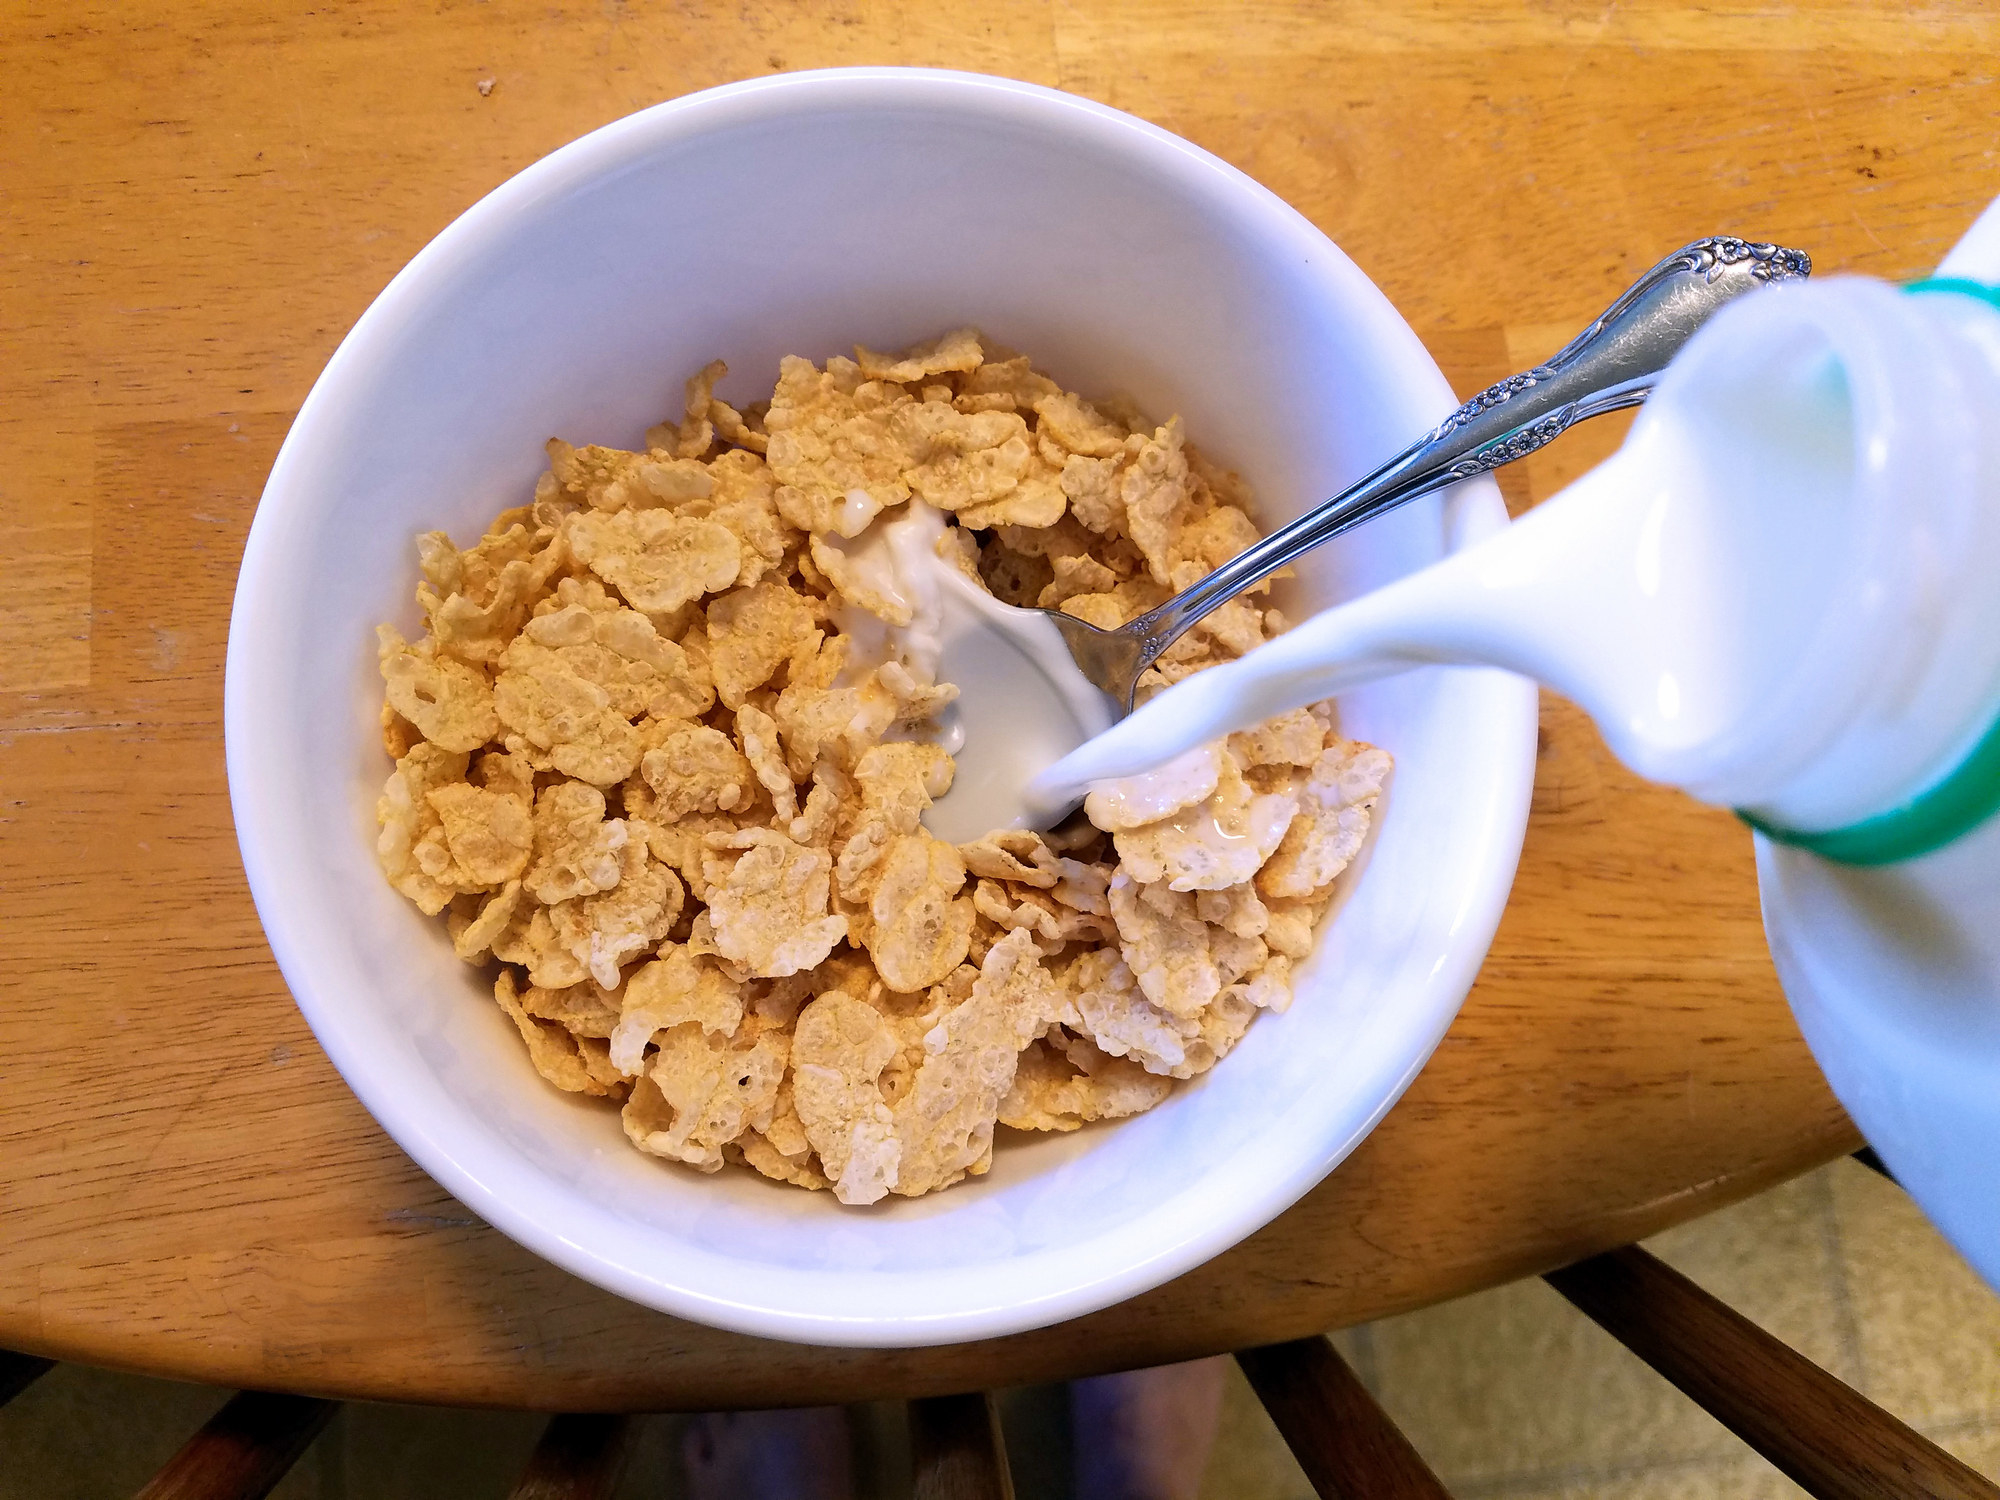 Pouring milk into a bowl of cereal.